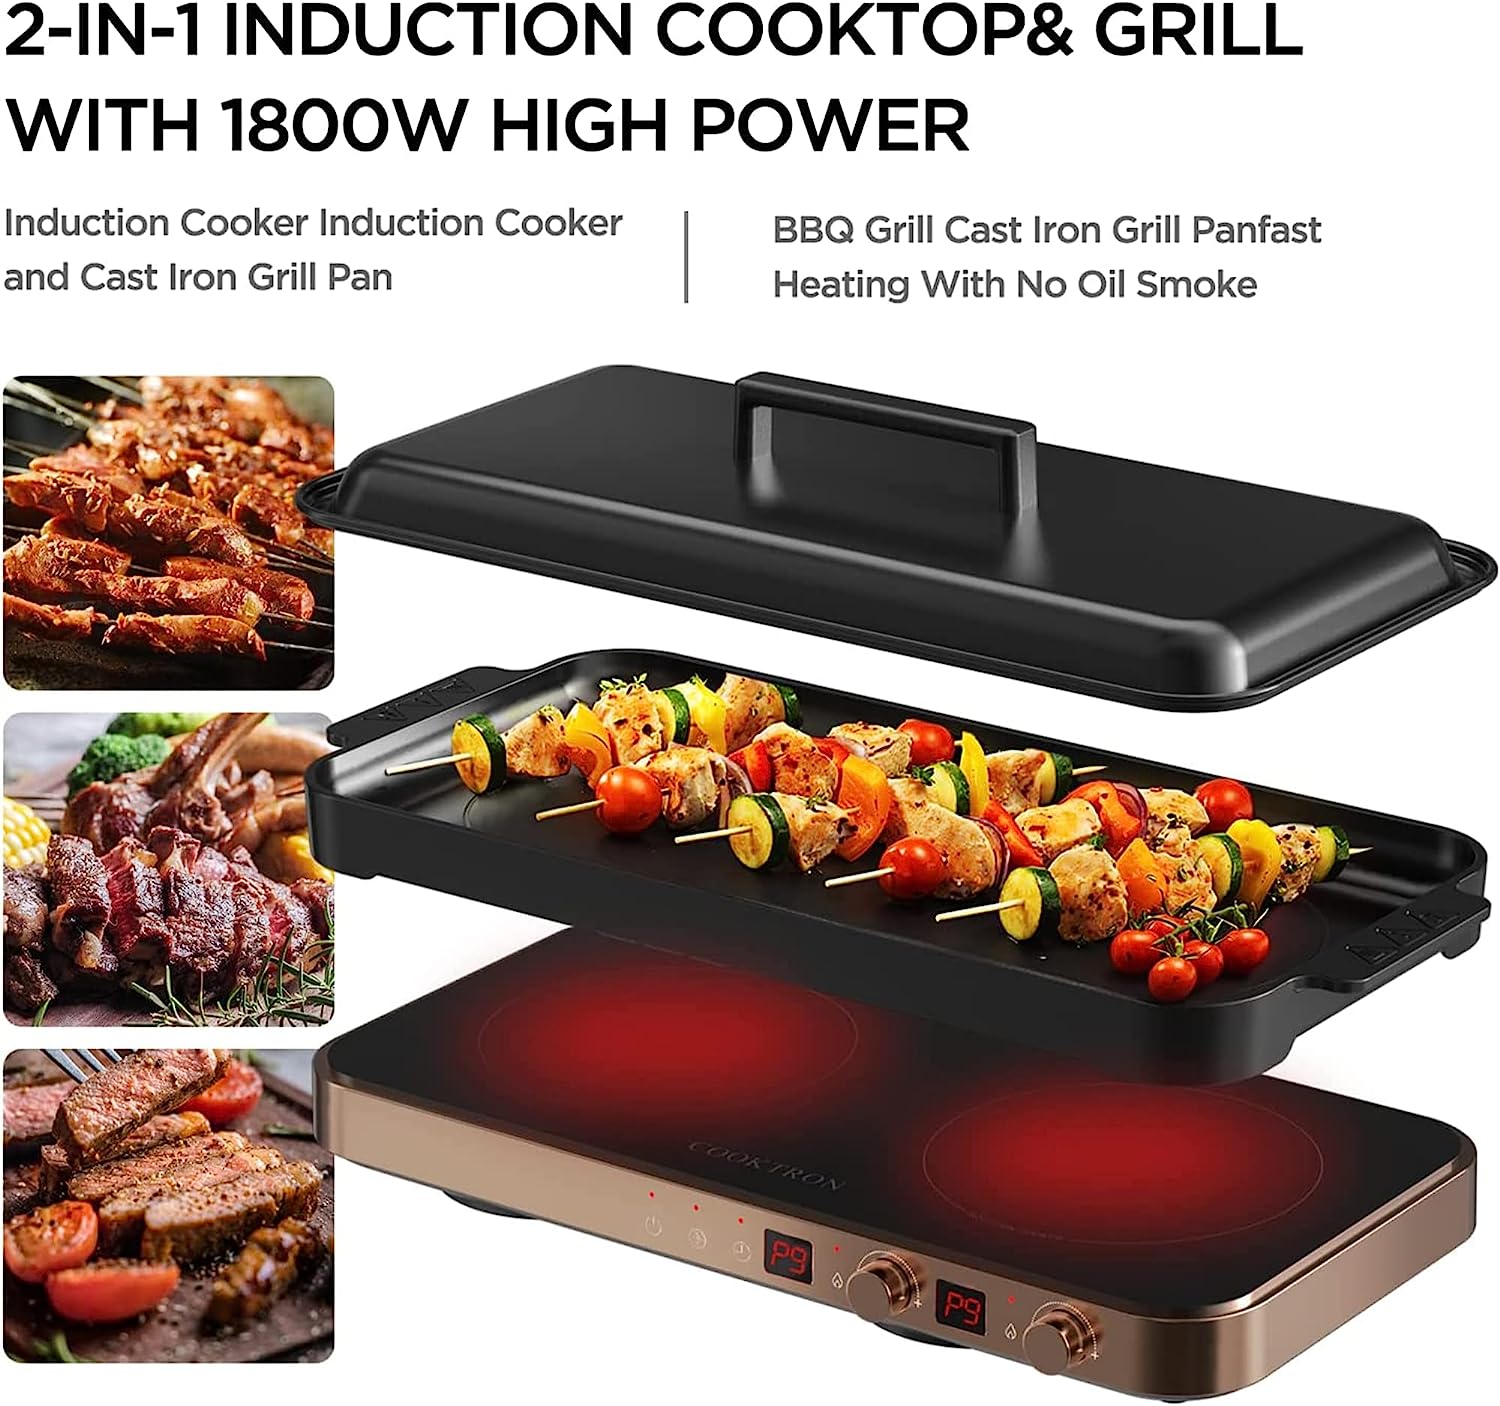 https://bigbigmart.com/wp-content/uploads/2023/07/COOKTRON-Portable-Compact-2-Burner-Induction-Cooktop-Electric-Stove-w-Smokeless-Cast-Iron-Griddle-Grill-Temperature-Control-Child-Lock-Rose-Gold5.jpg